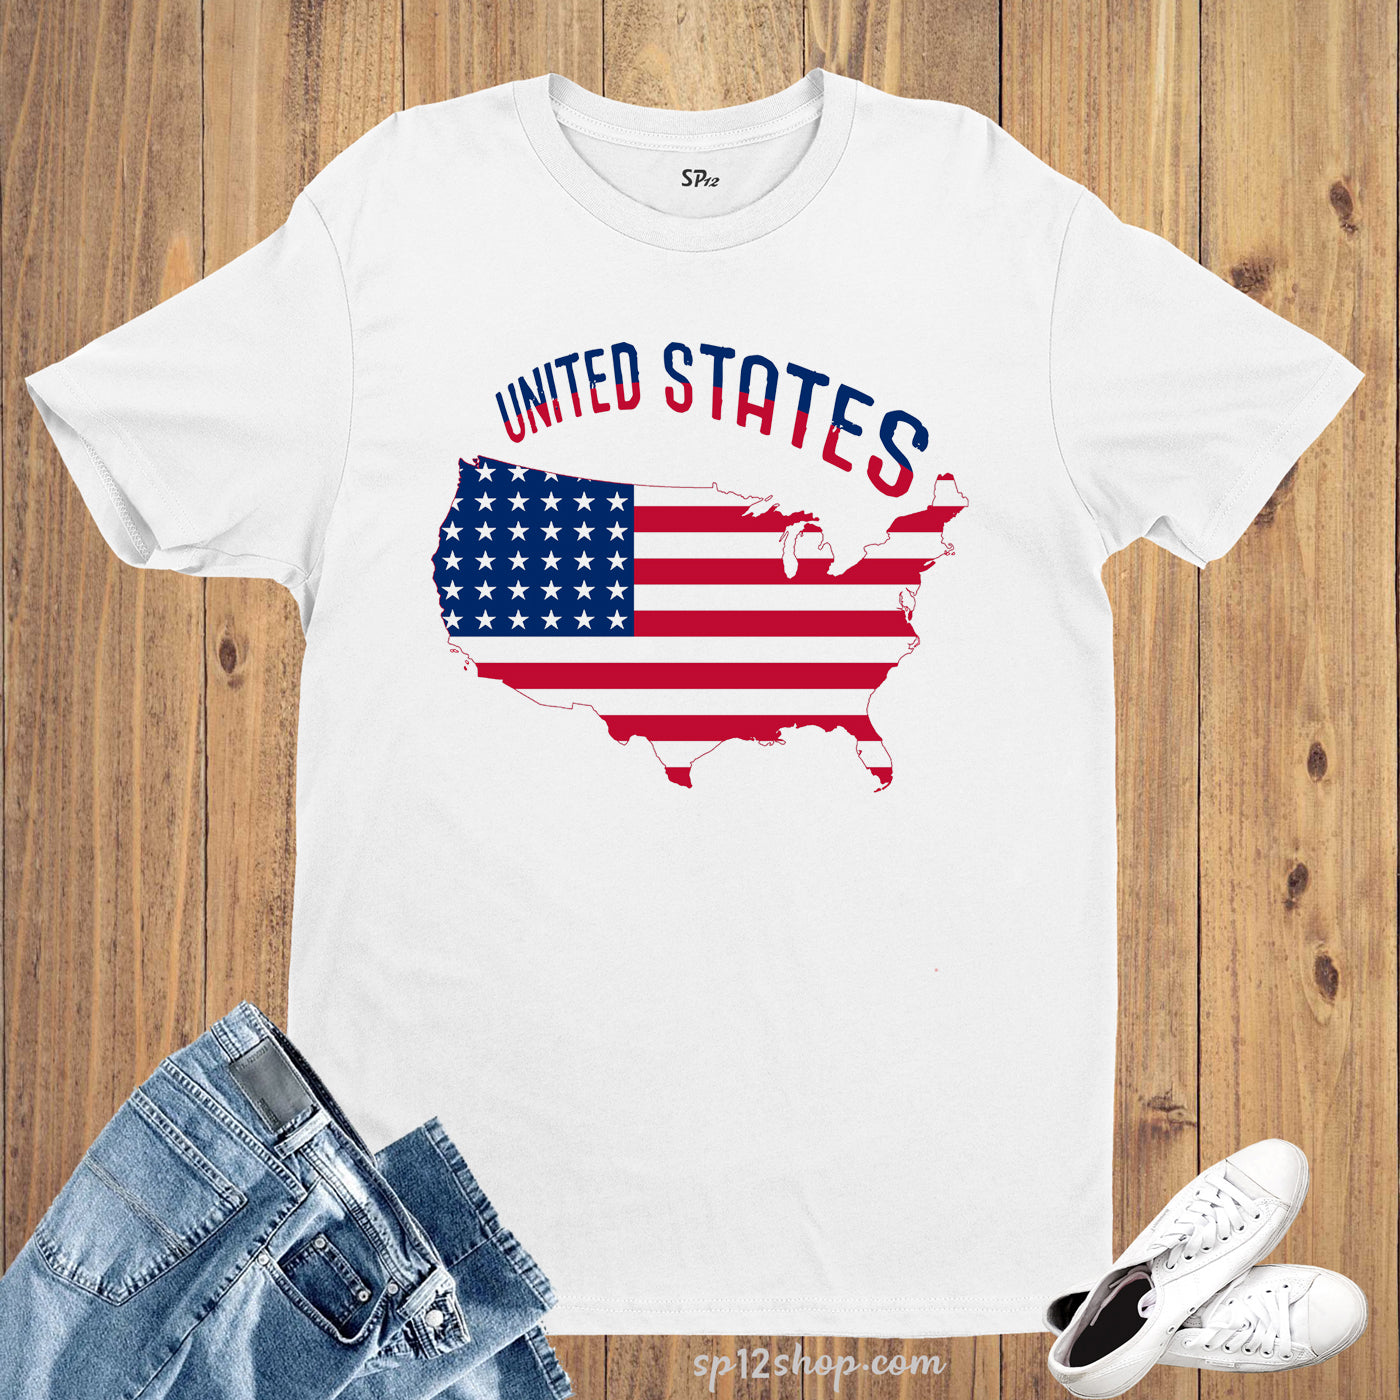 United States Flag T Shirt Olympics FIFA World Cup Country Flag Tee Shirt